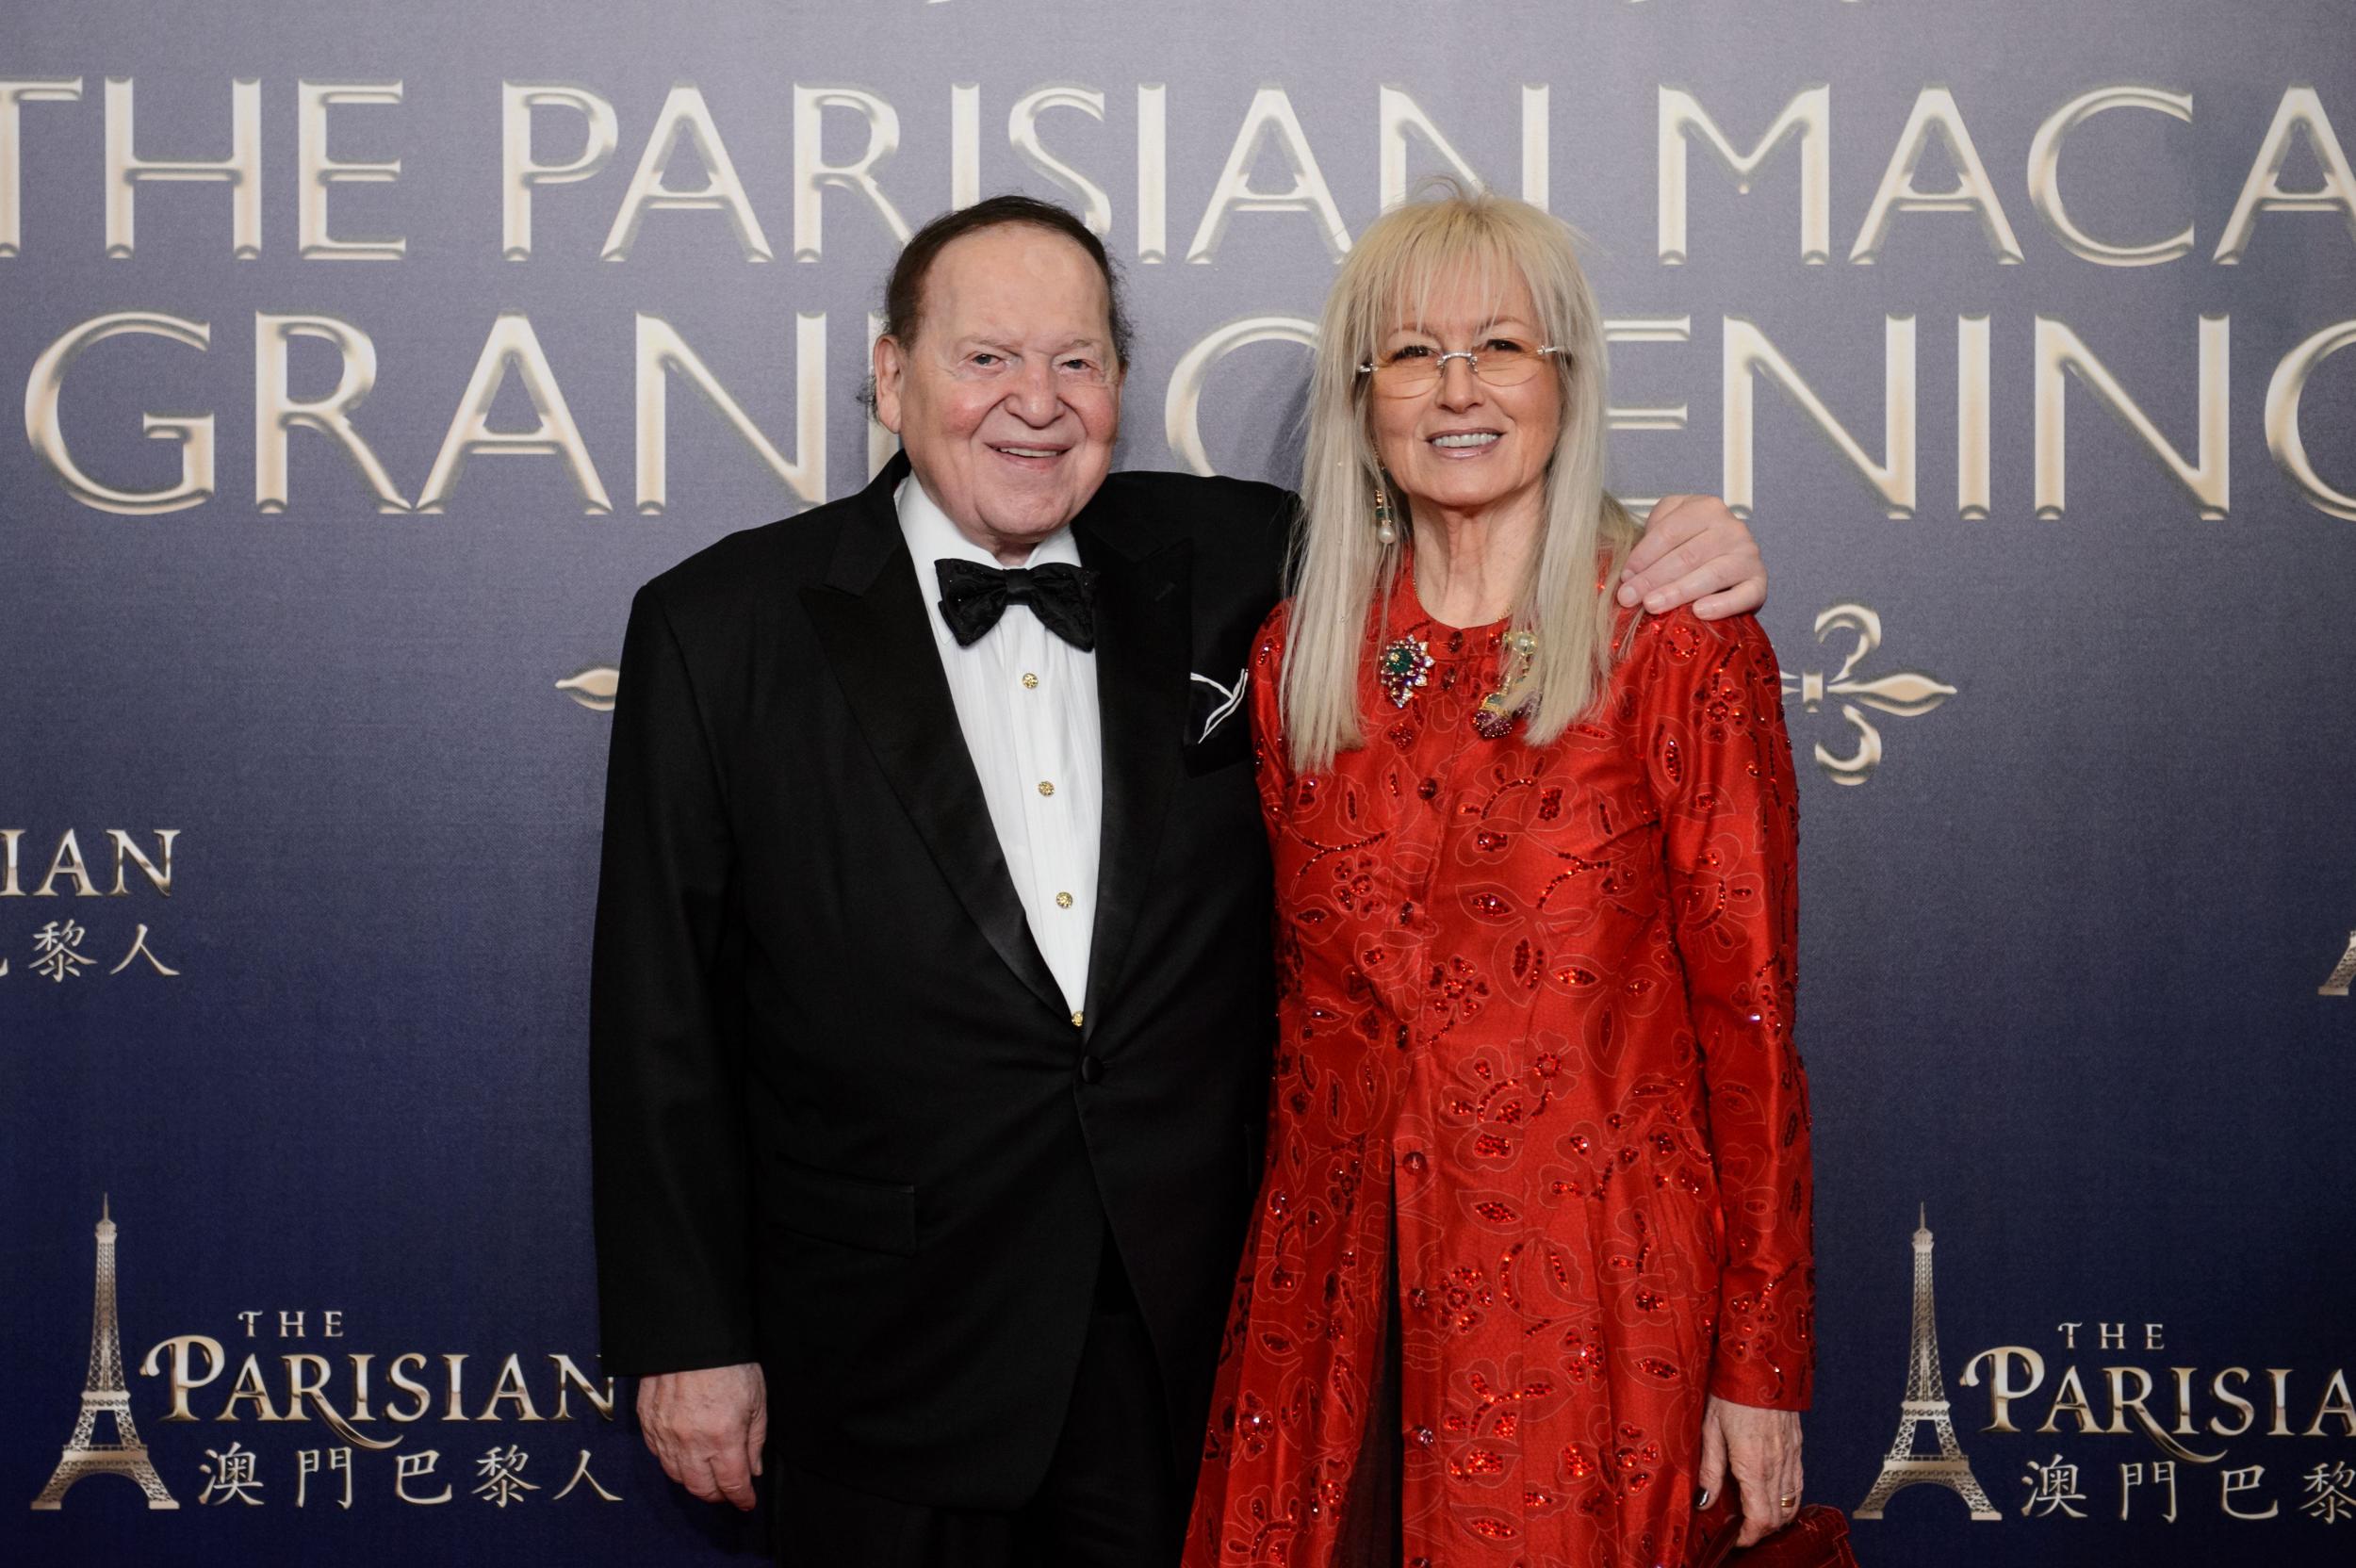 Sheldon Adelson poses with his wife Miriam, who is set to receive the Medal of Freedom from Donald Trump